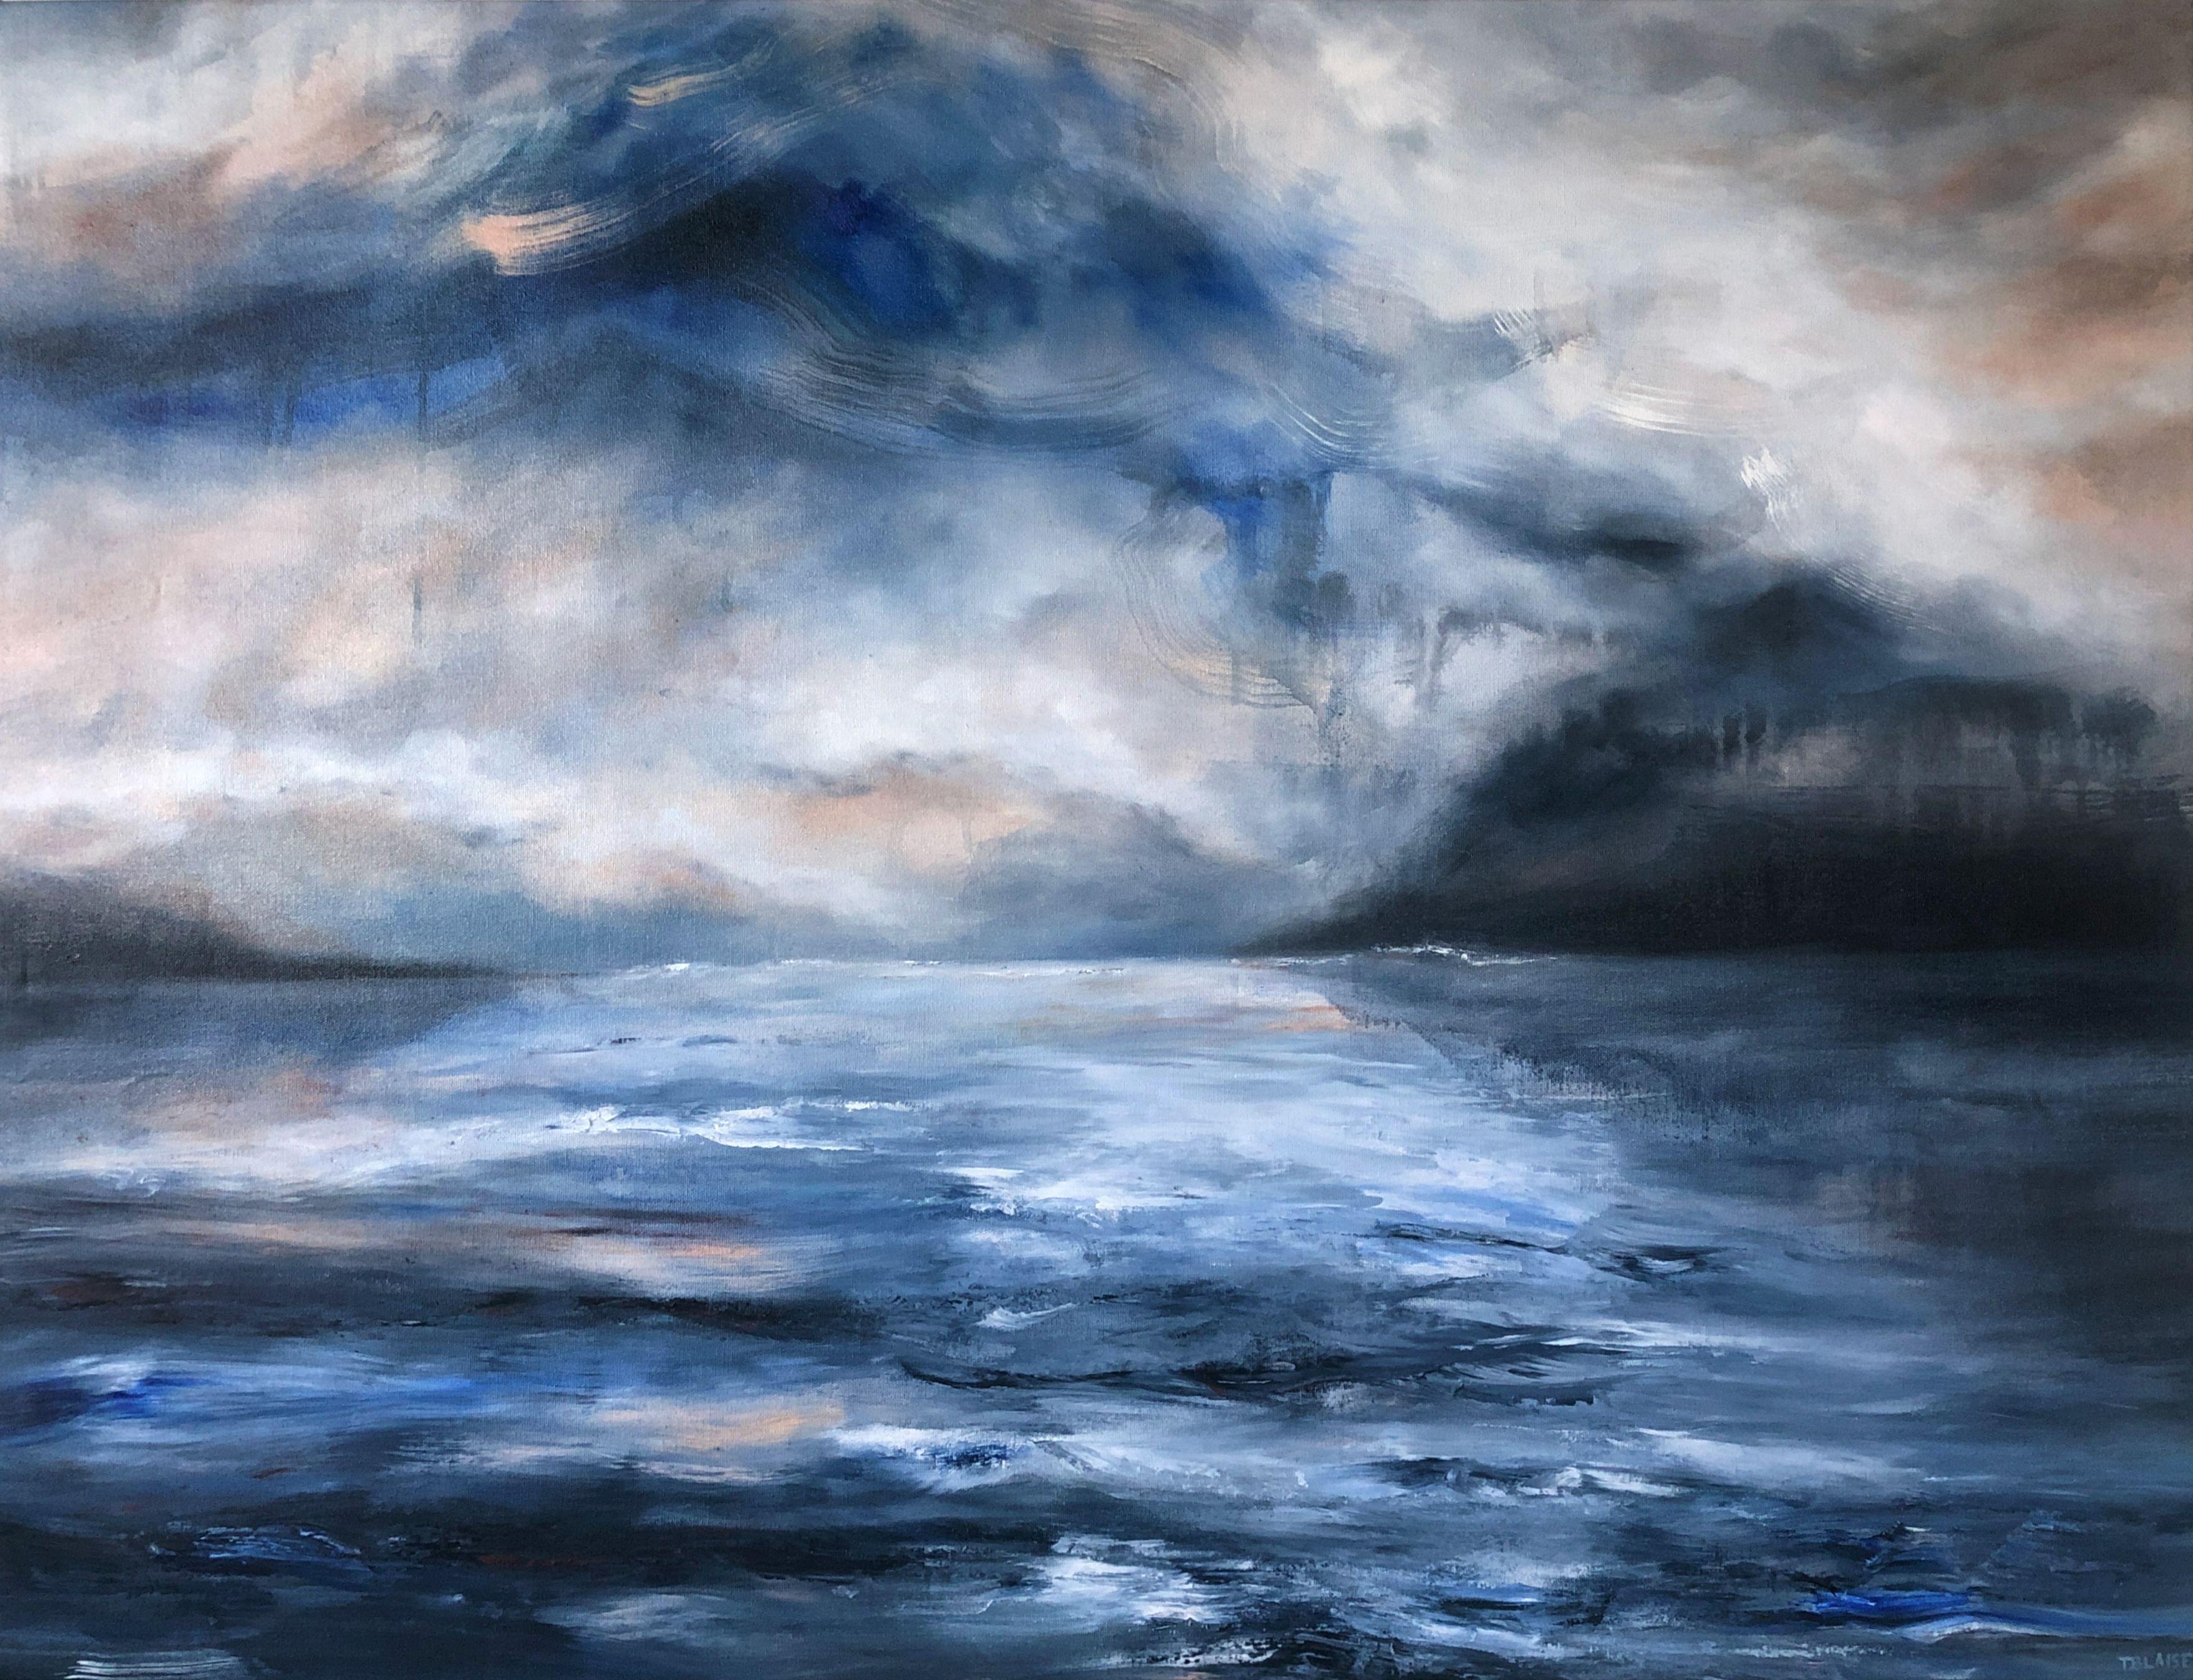 Traveling Water is an original painting that explores an imagined coastal landscape. It is inspired by the idea of seeking light in darkness and finding a sense of calm after the storm. The mixed media painting is brought to life through the